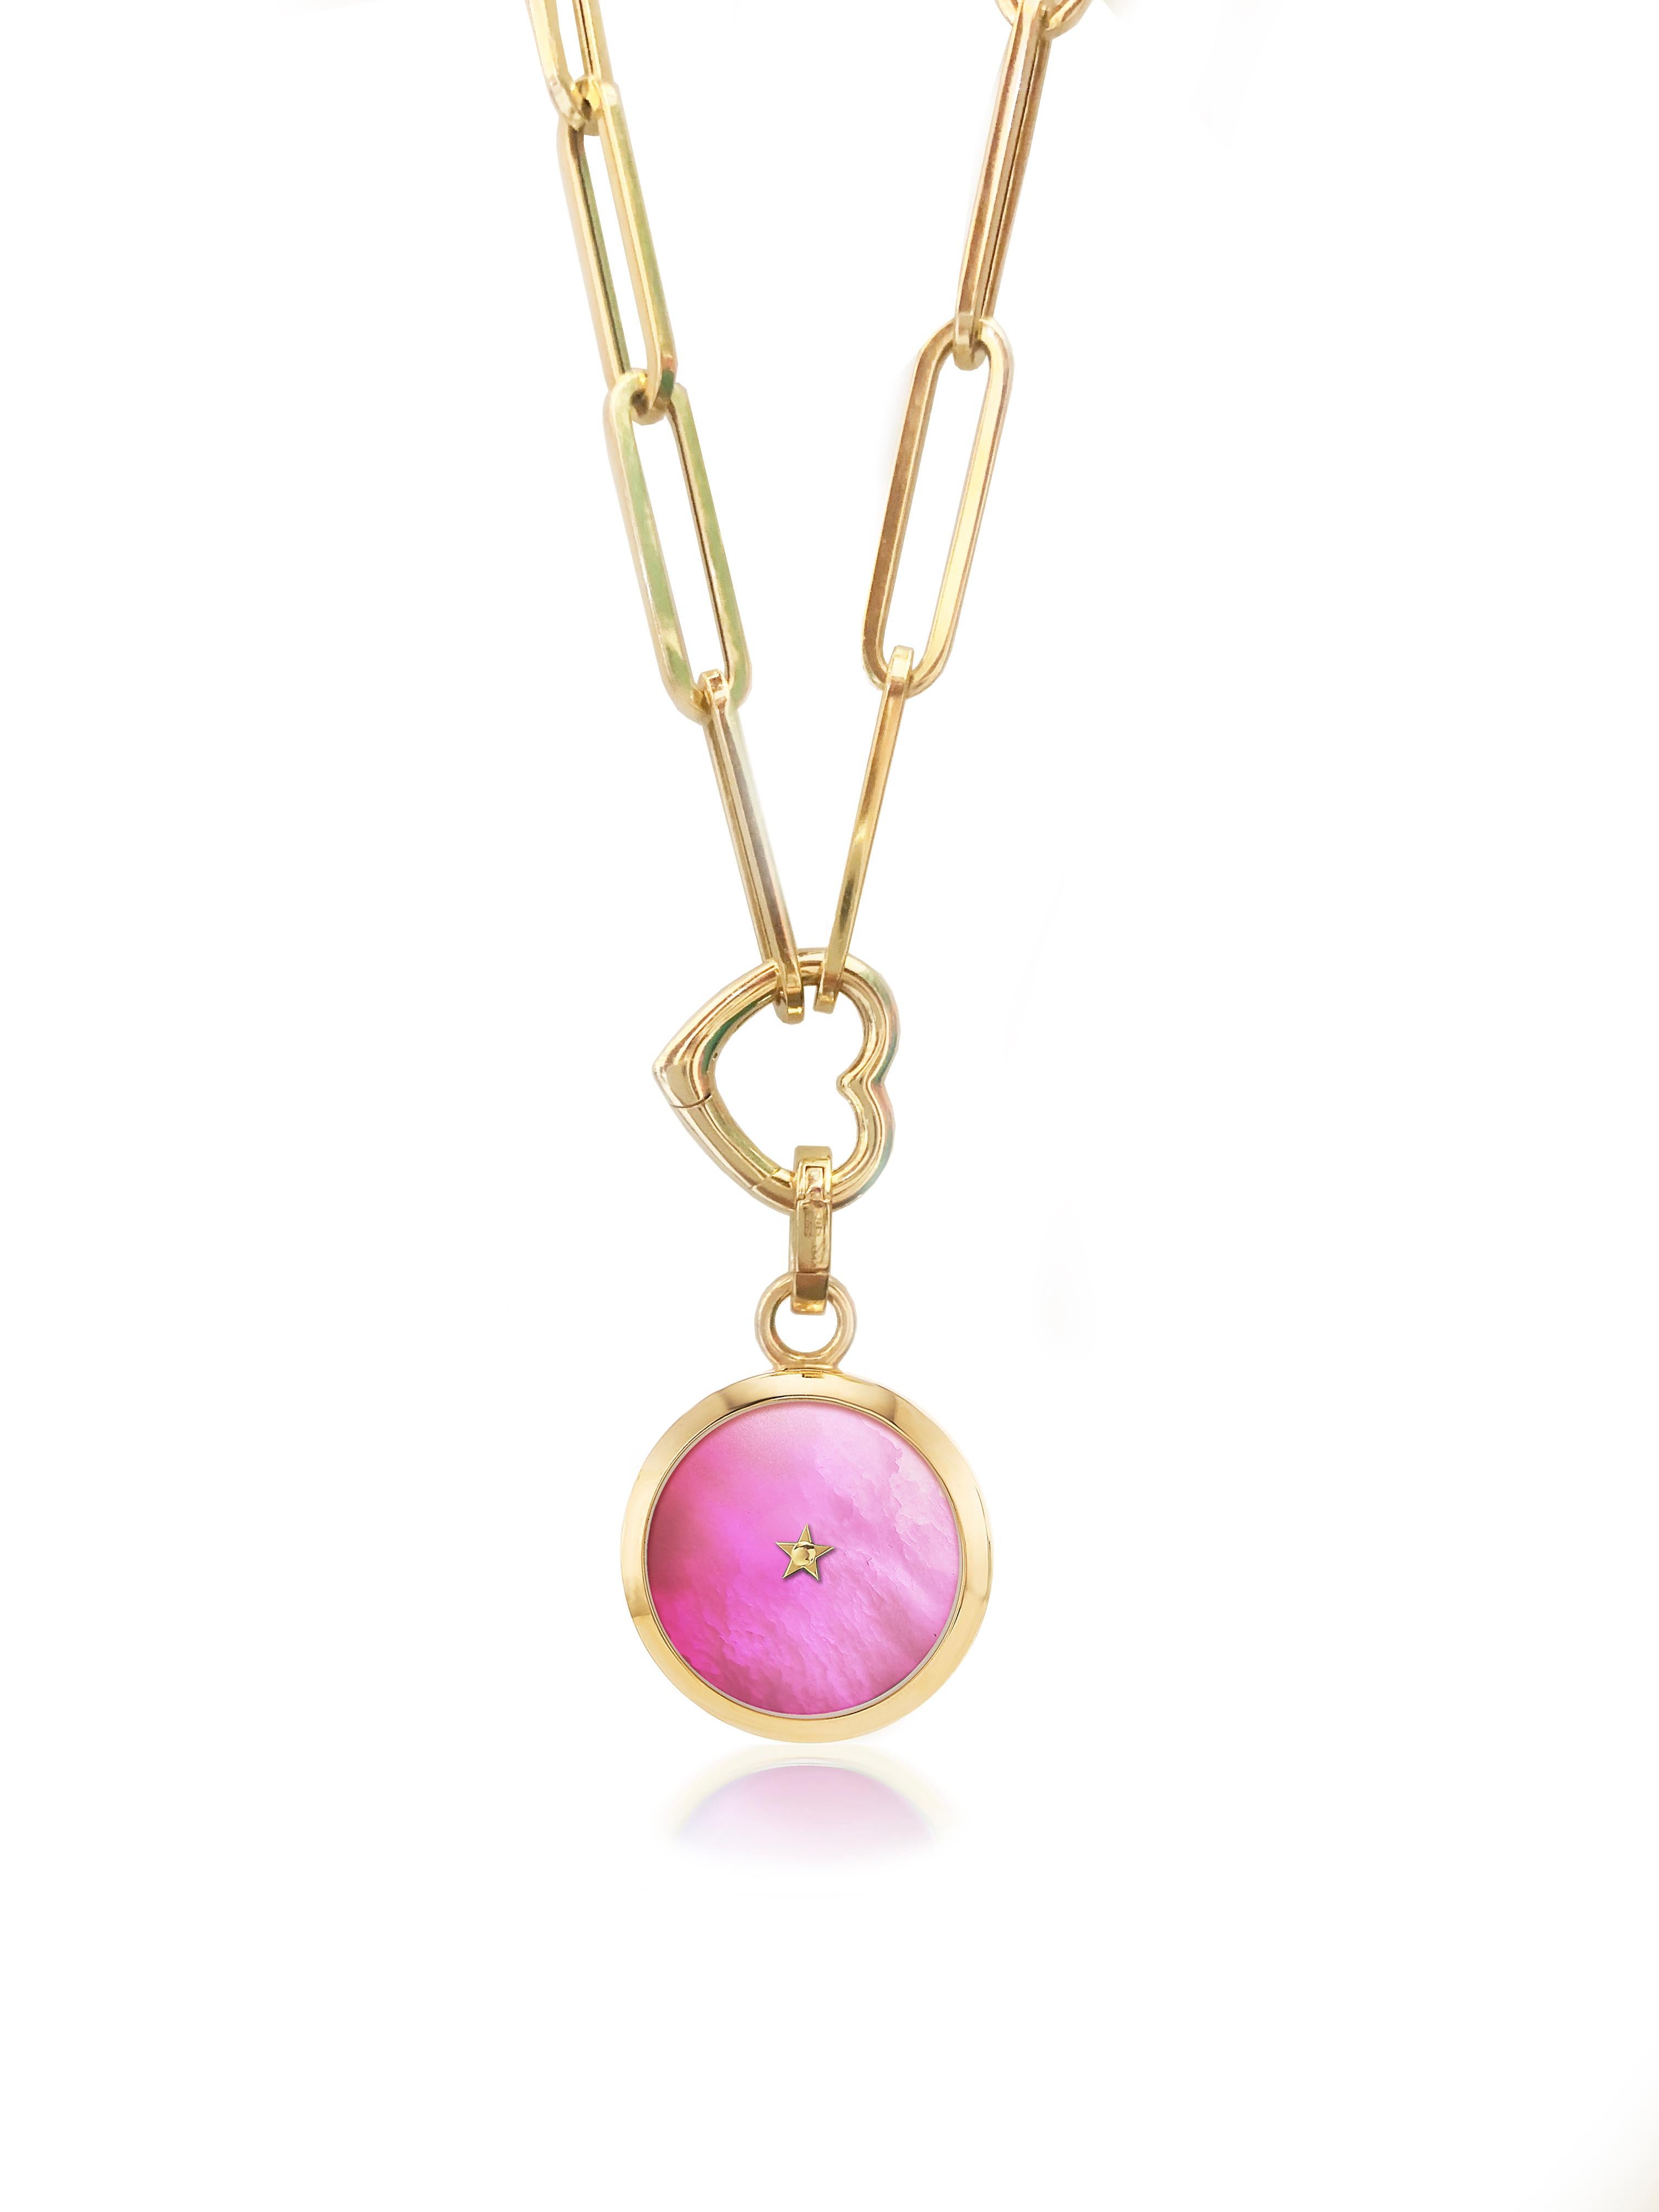 Carpe Diem Pendant  is non-time-telling timepiece, essentially golden sunray finishing face.
Beautiful Pendant with a movement inside that allows the little star in the middle to move every second to remind that time is precious ! 
The golden star